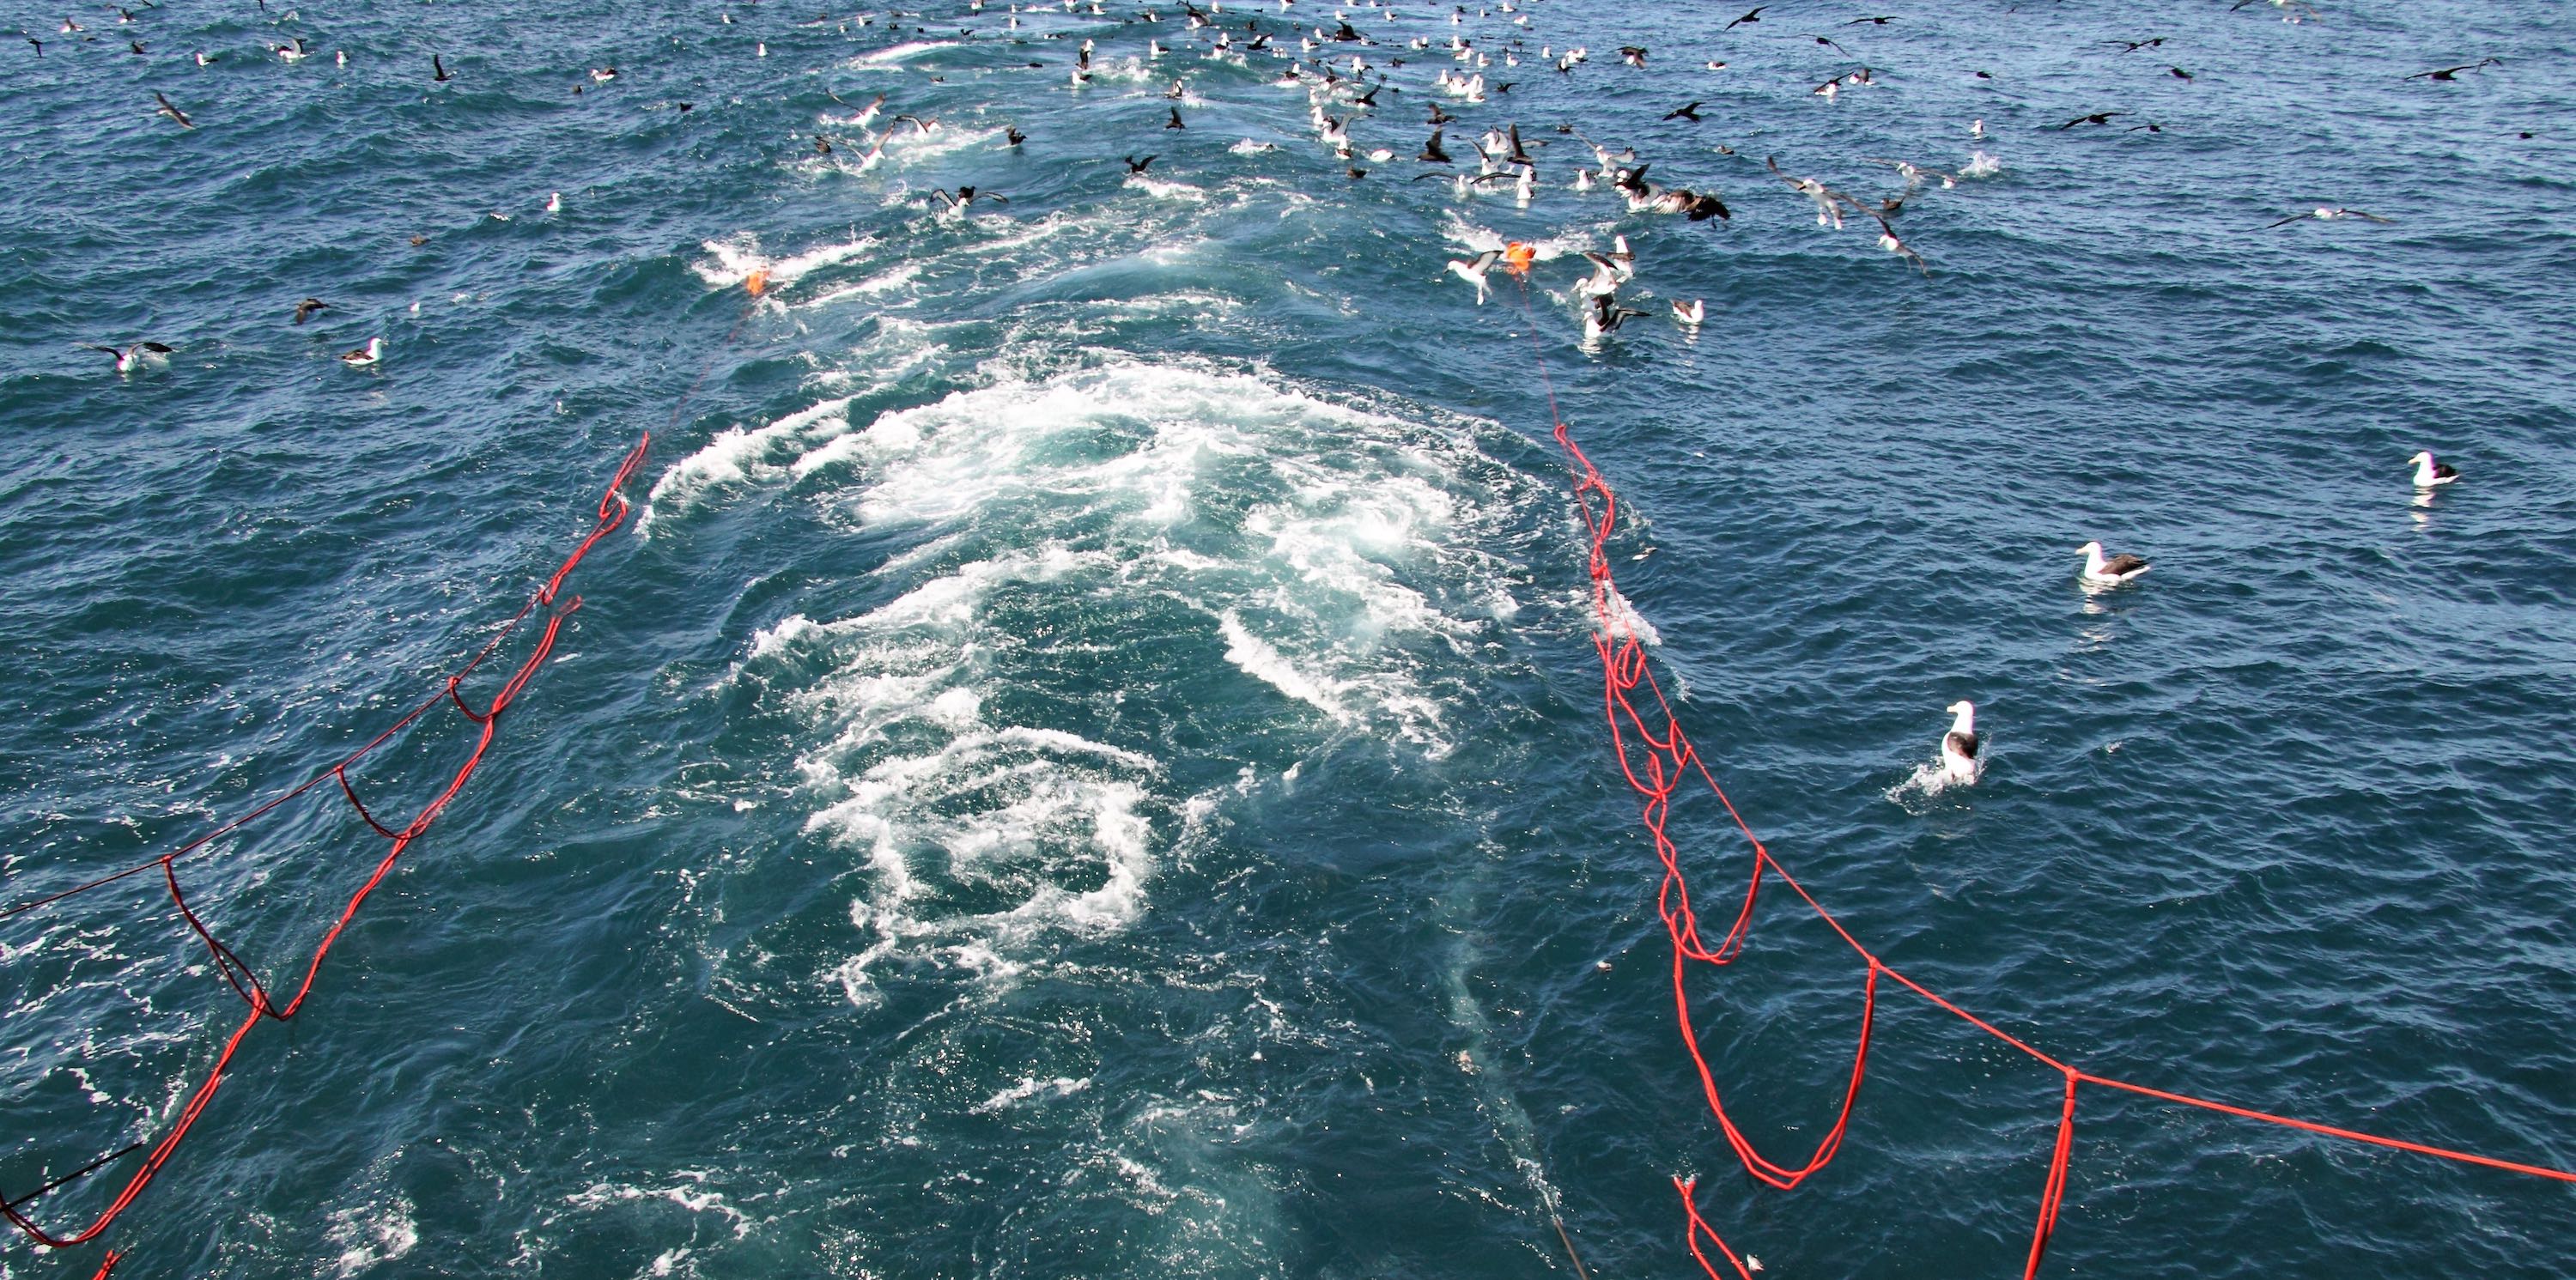 Birds avoid the red ropes deployed behind a trawler.